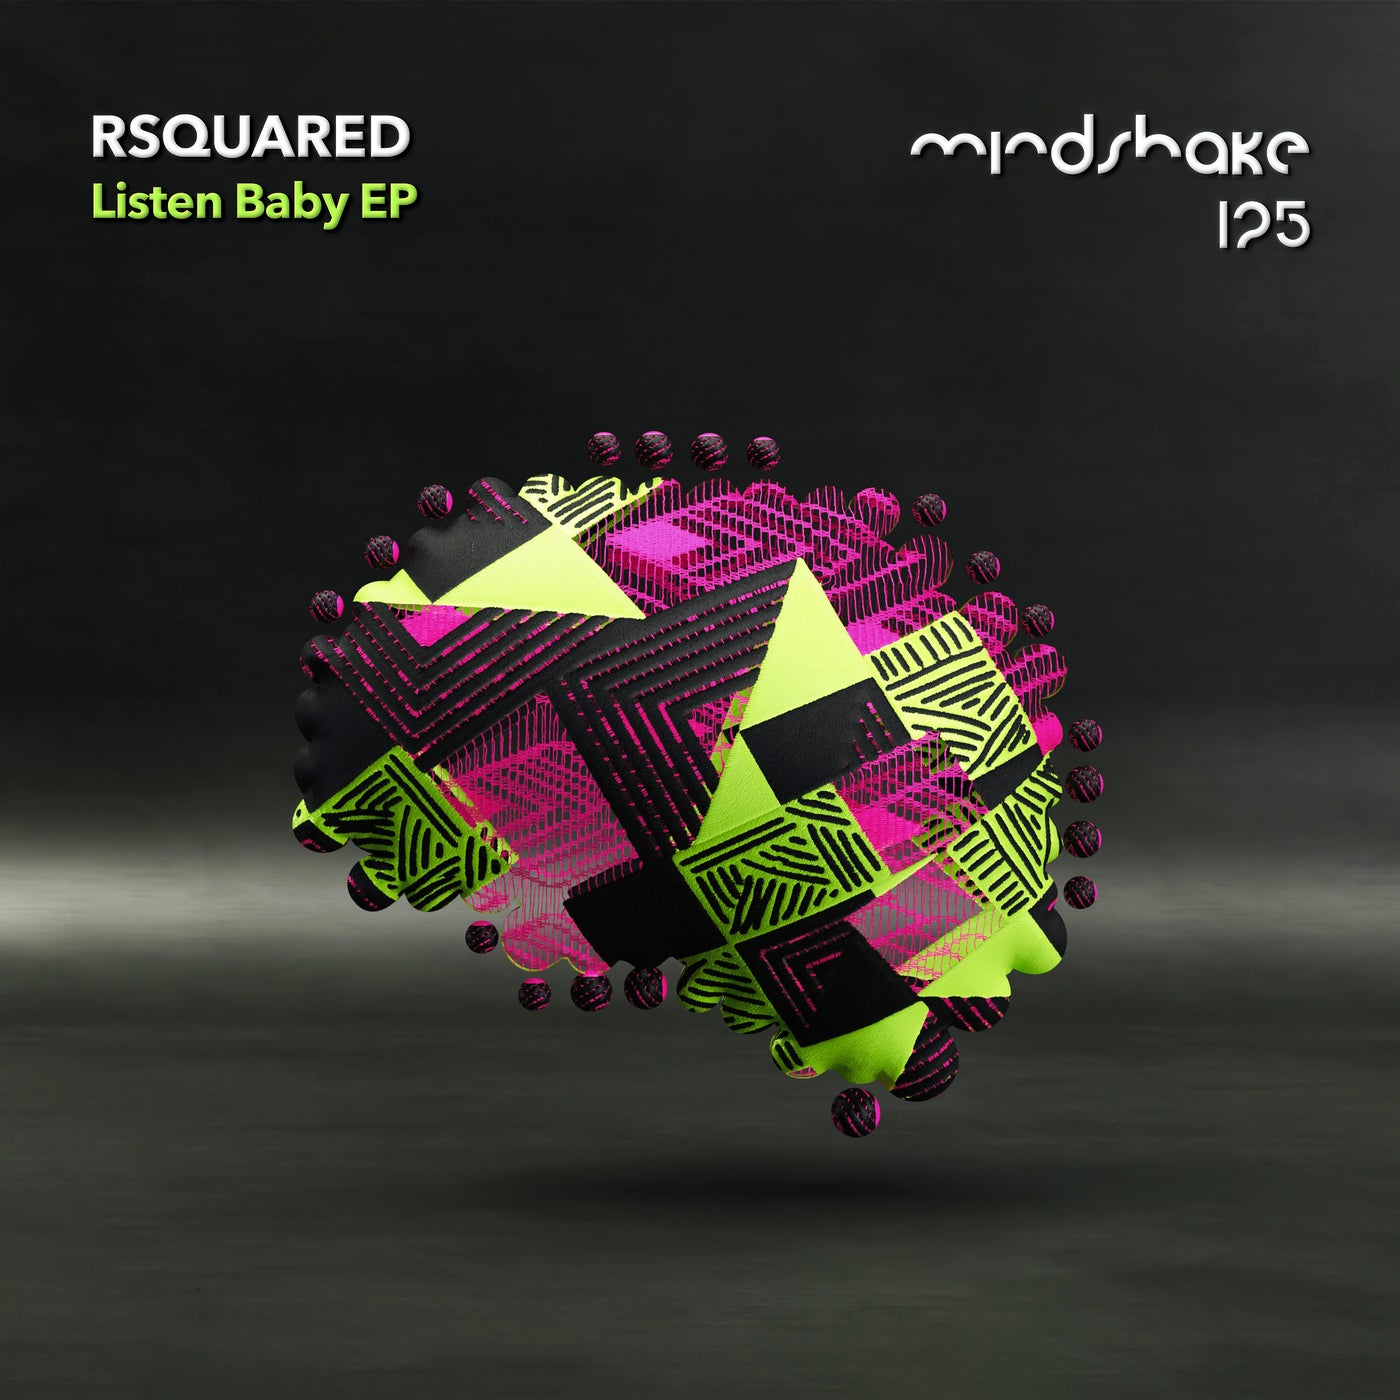 image cover: RSquared - Listen Baby EP on Mindshake Records